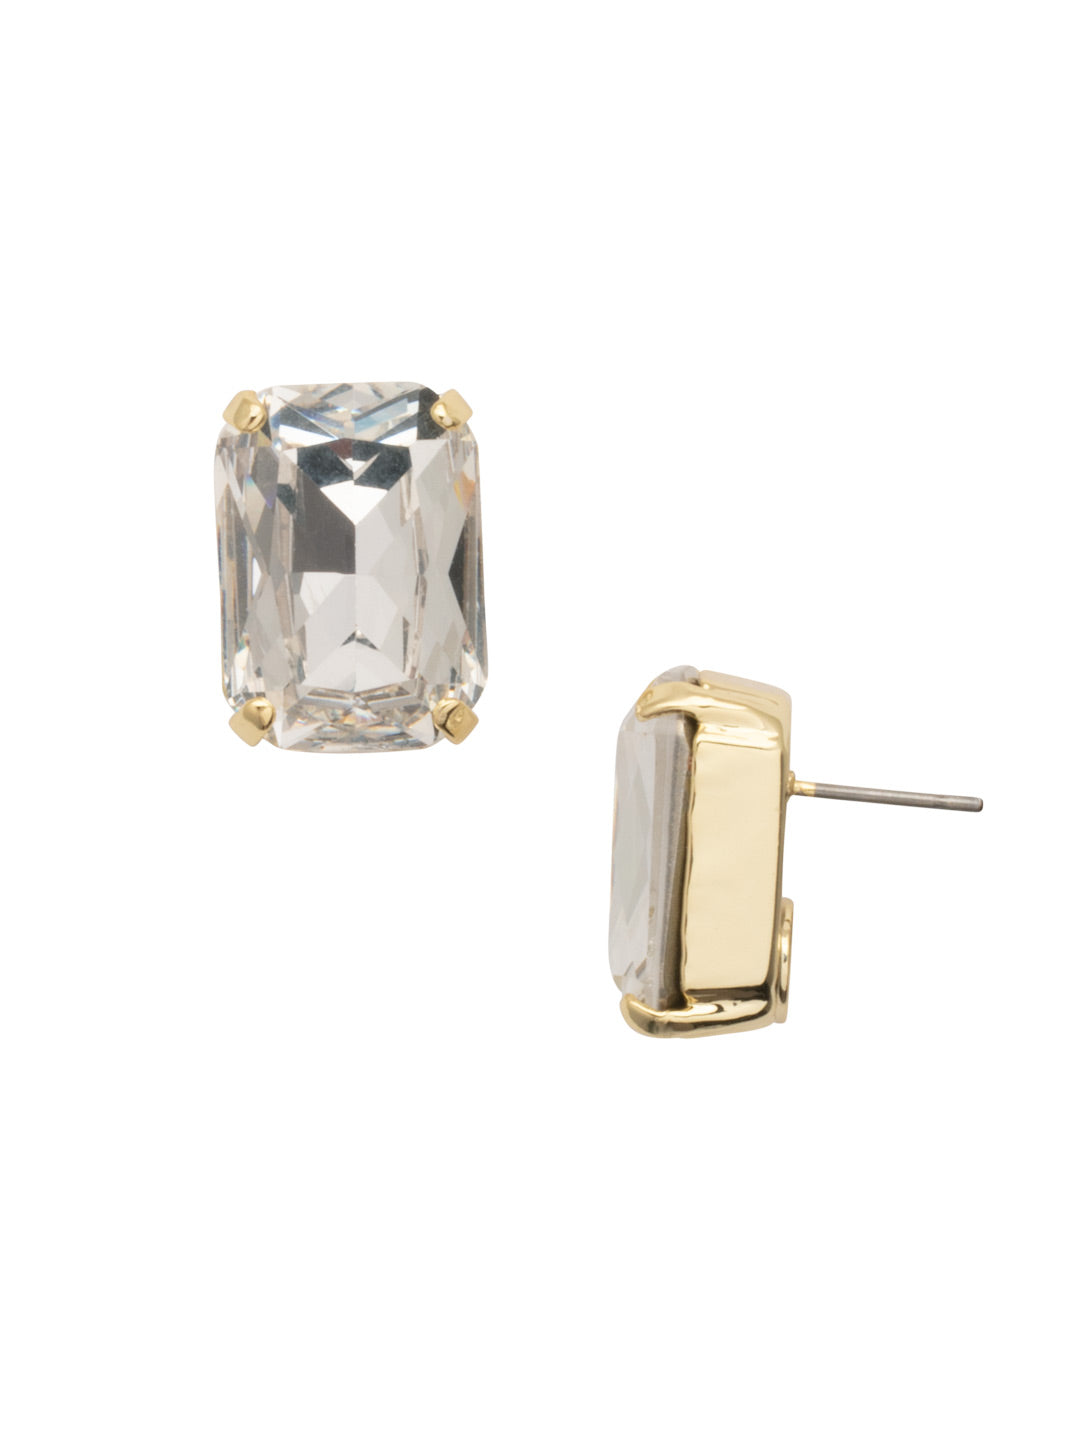 Brynn Stud Earrings - EBY44BGCRY - <p>The Brynn Stud Earrings can be worn alone or paired with a fabulous statement necklace for some added sparkle to any outfit. From Sorrelli's Crystal collection in our Bright Gold-tone finish.</p>